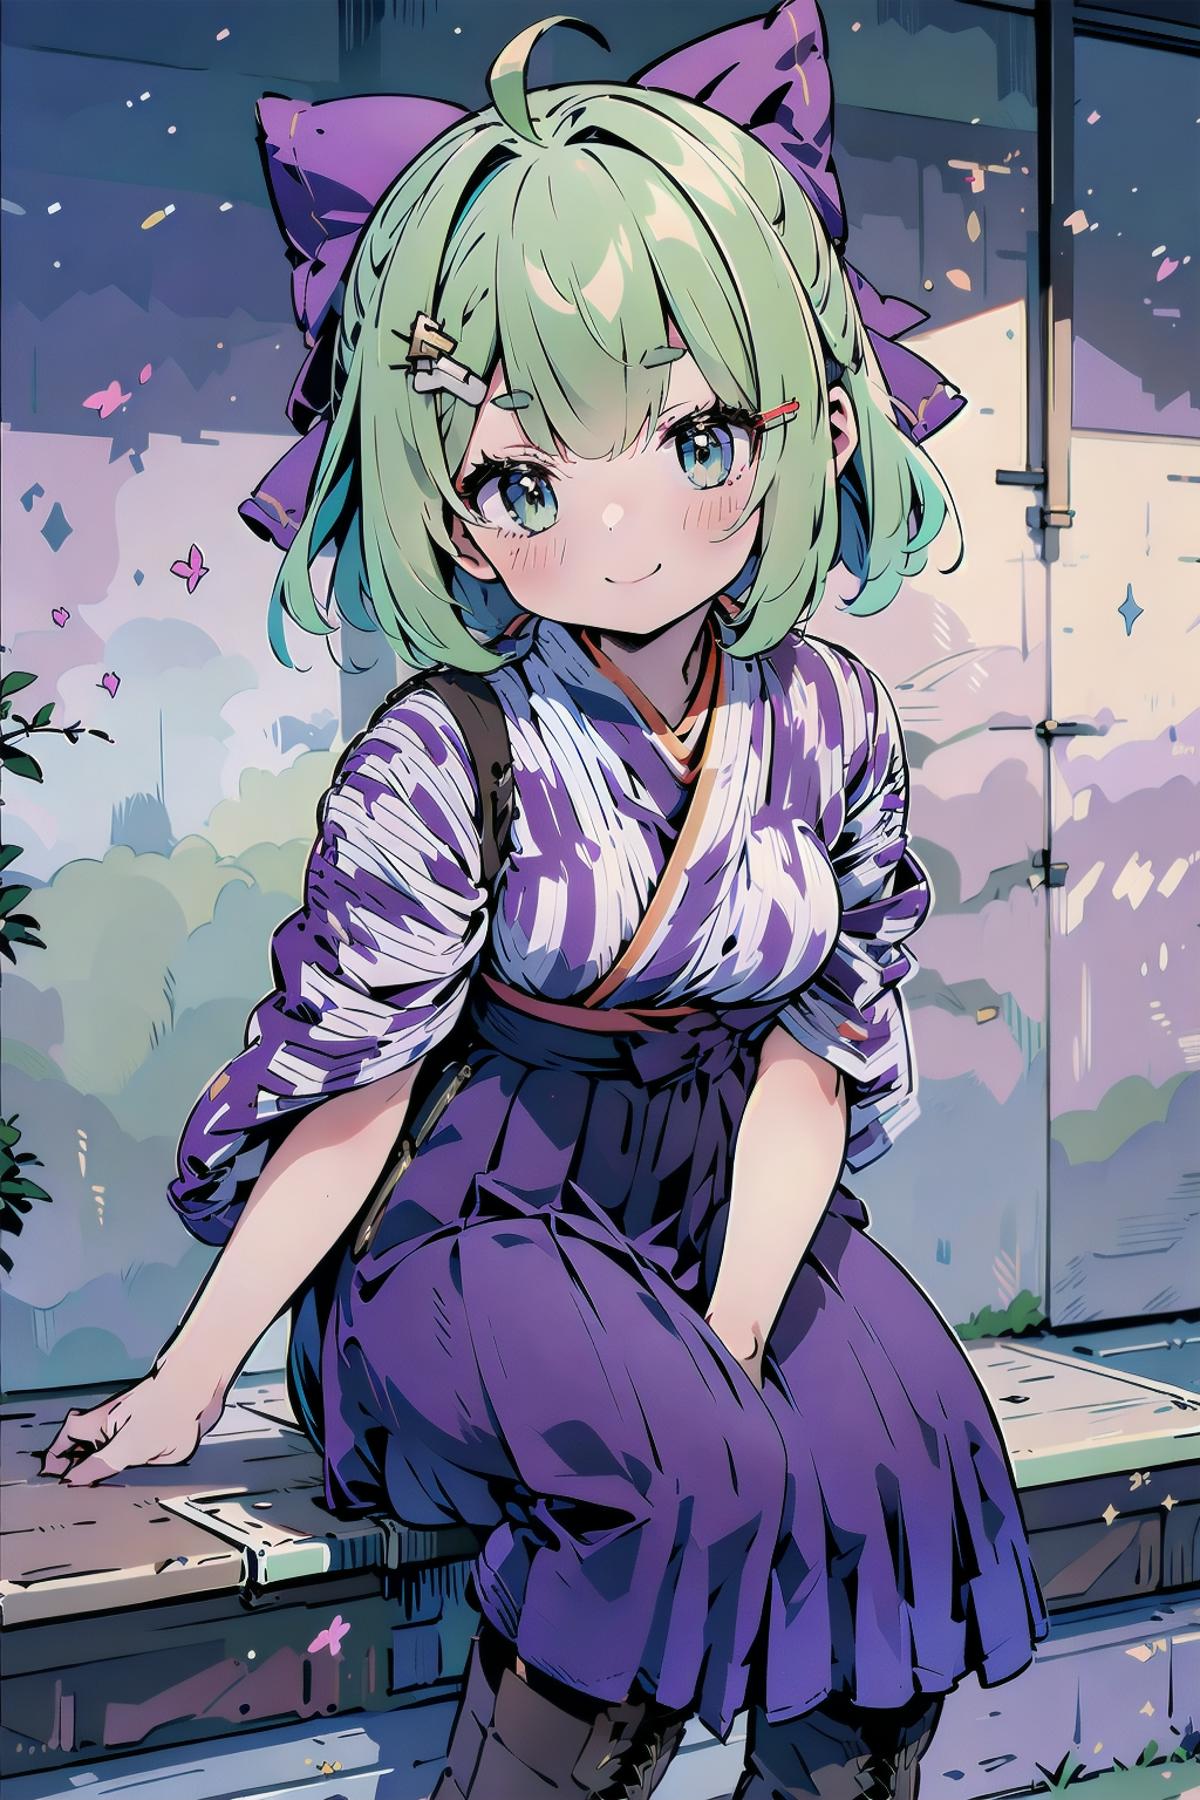 Green Short Hair Purple Bow Girl image by KeyTail